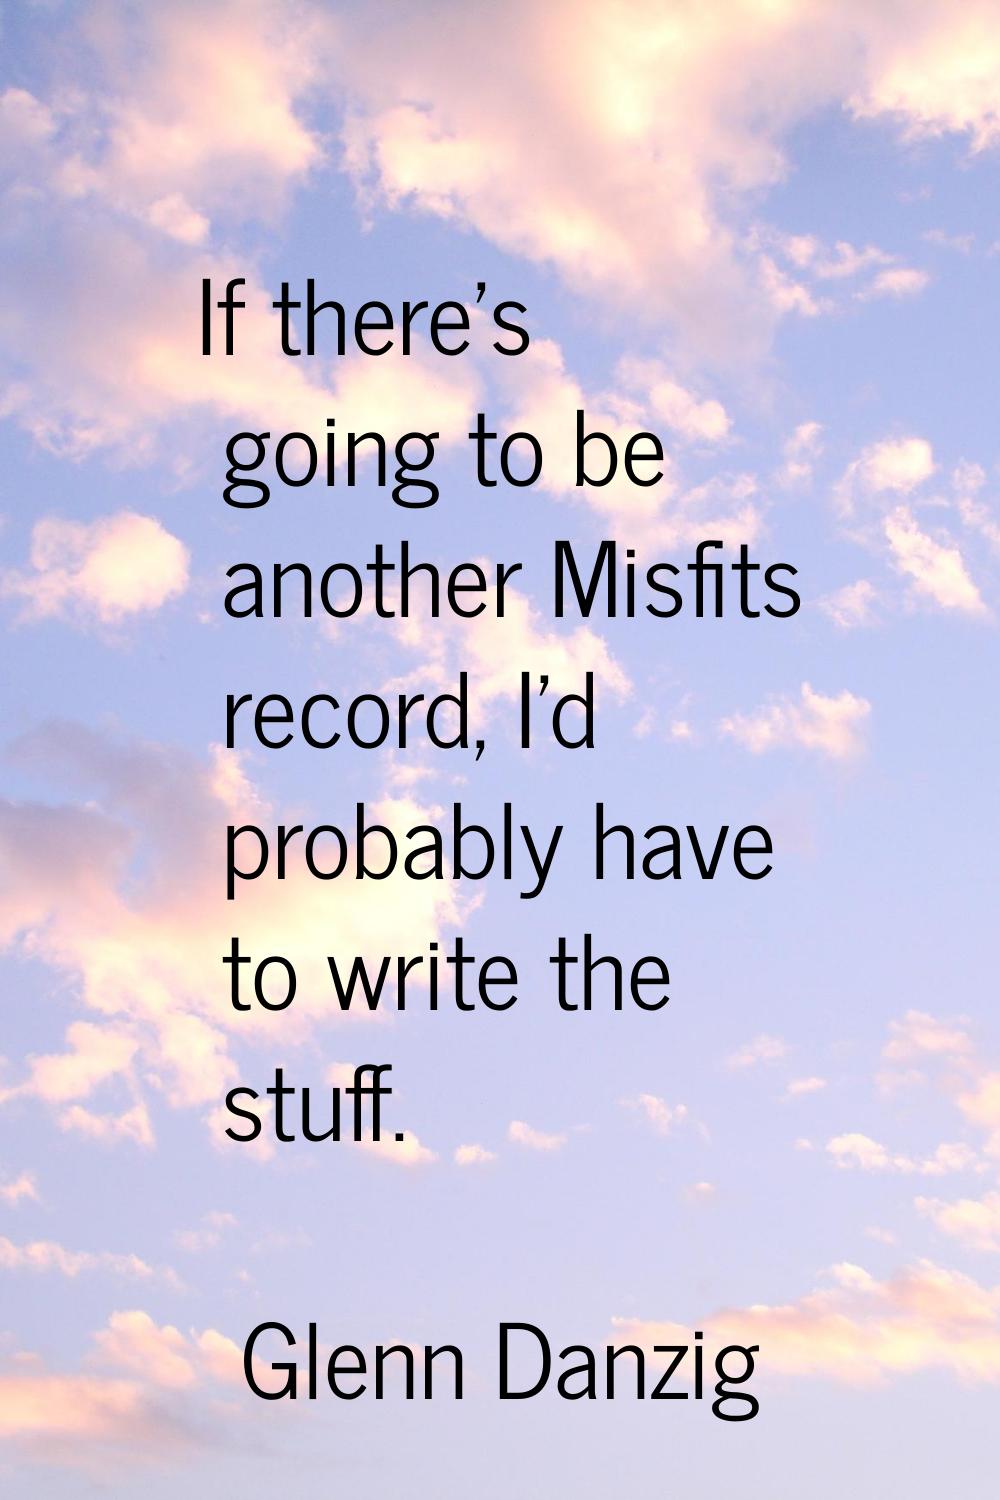 If there's going to be another Misfits record, I'd probably have to write the stuff.